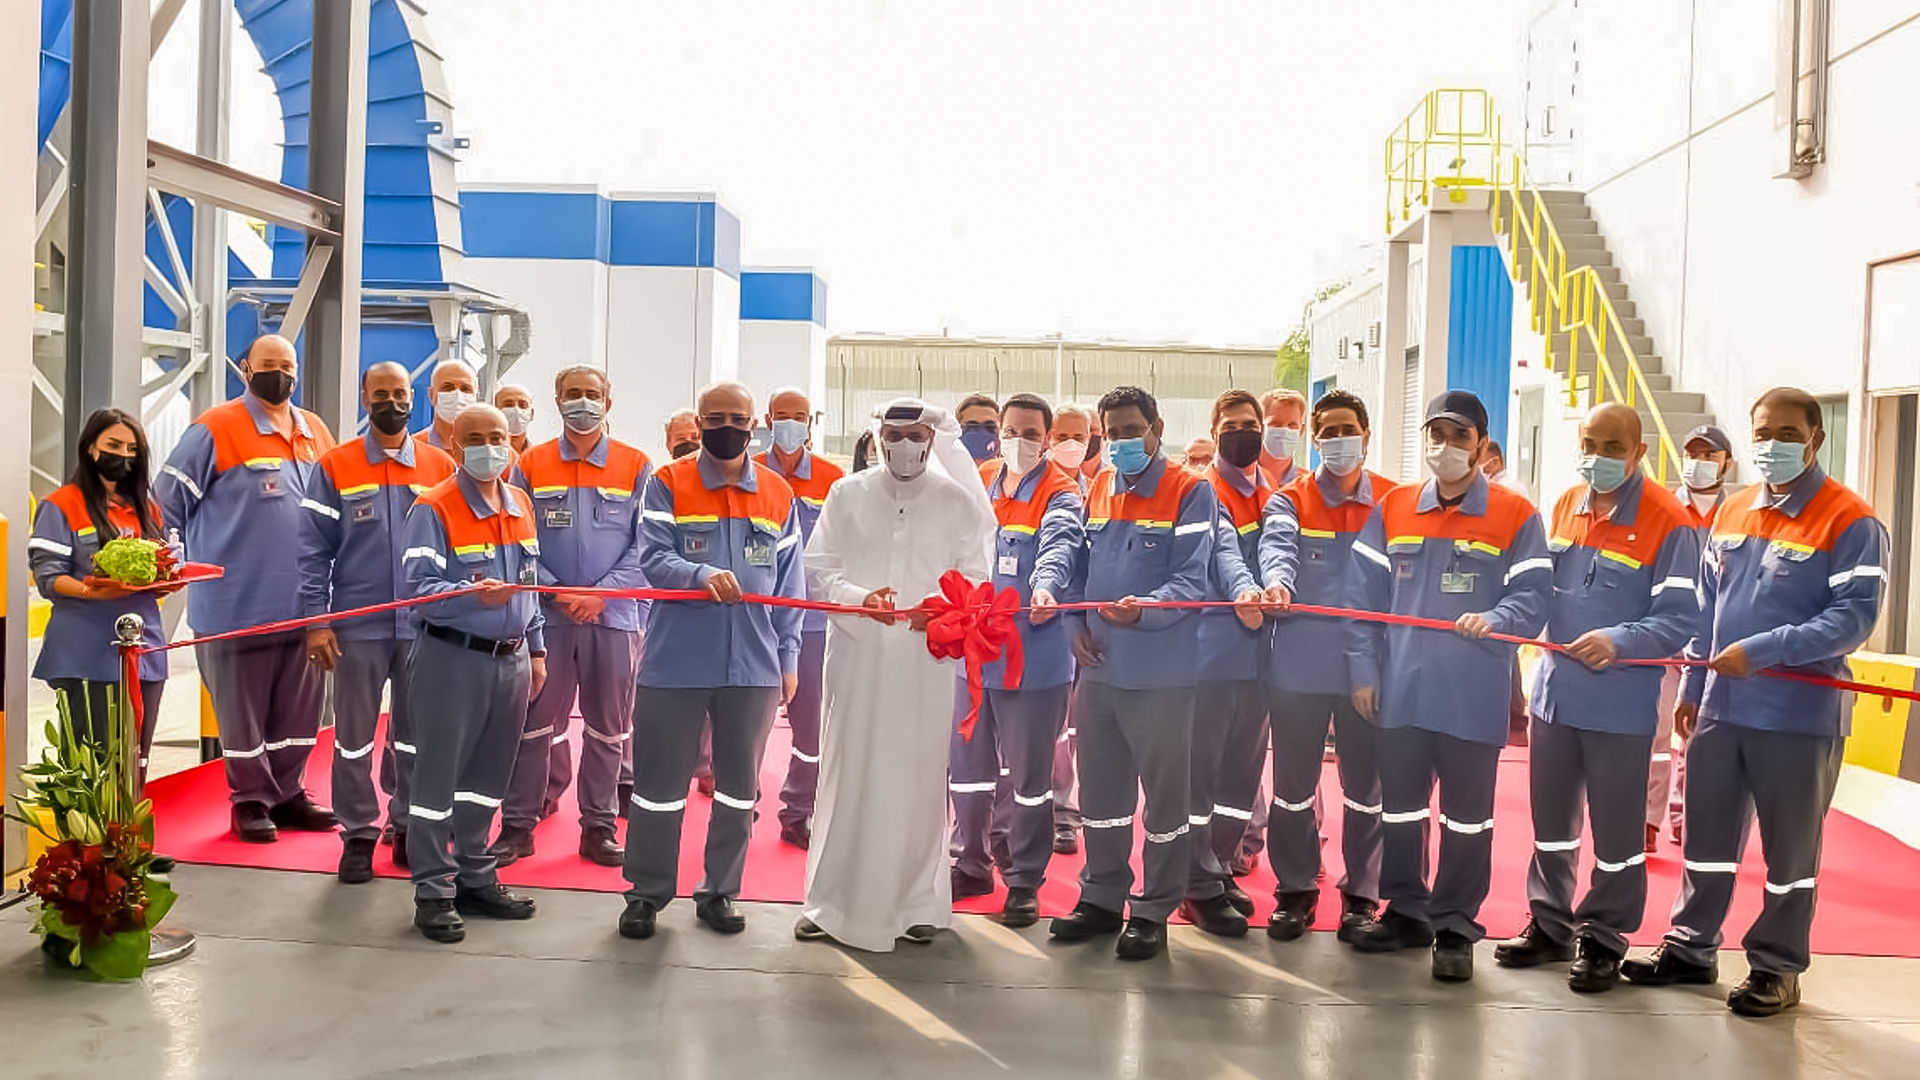 Alba's SPL Treatment Plant in Bahrain, a first in the region